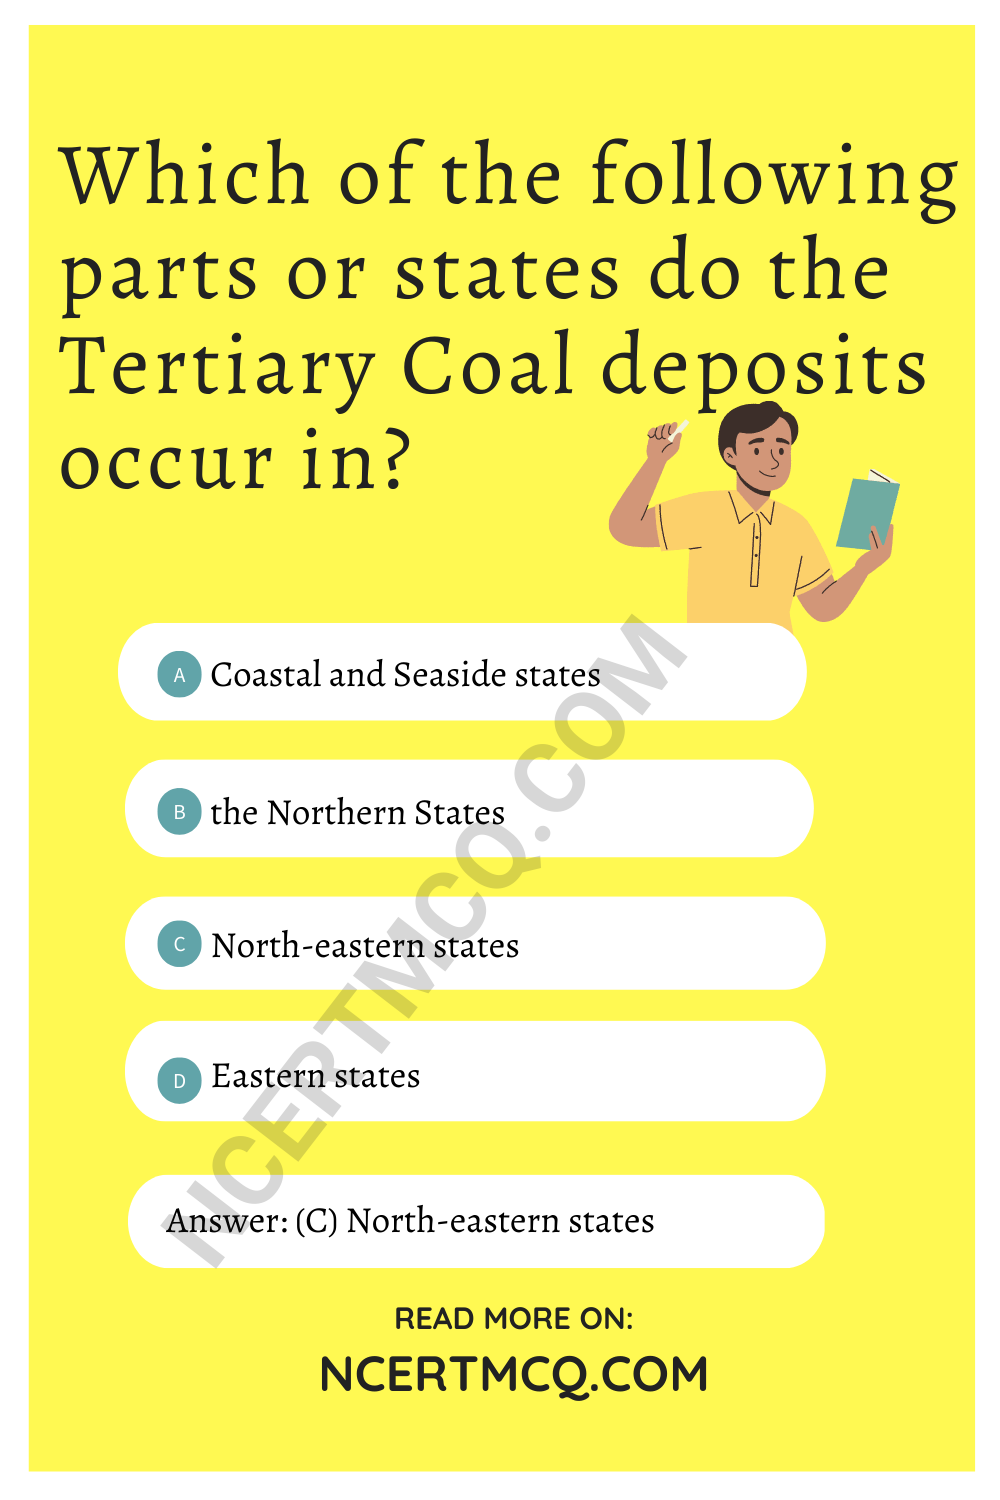 Which of the following parts or states do the Tertiary Coal deposits occur in?